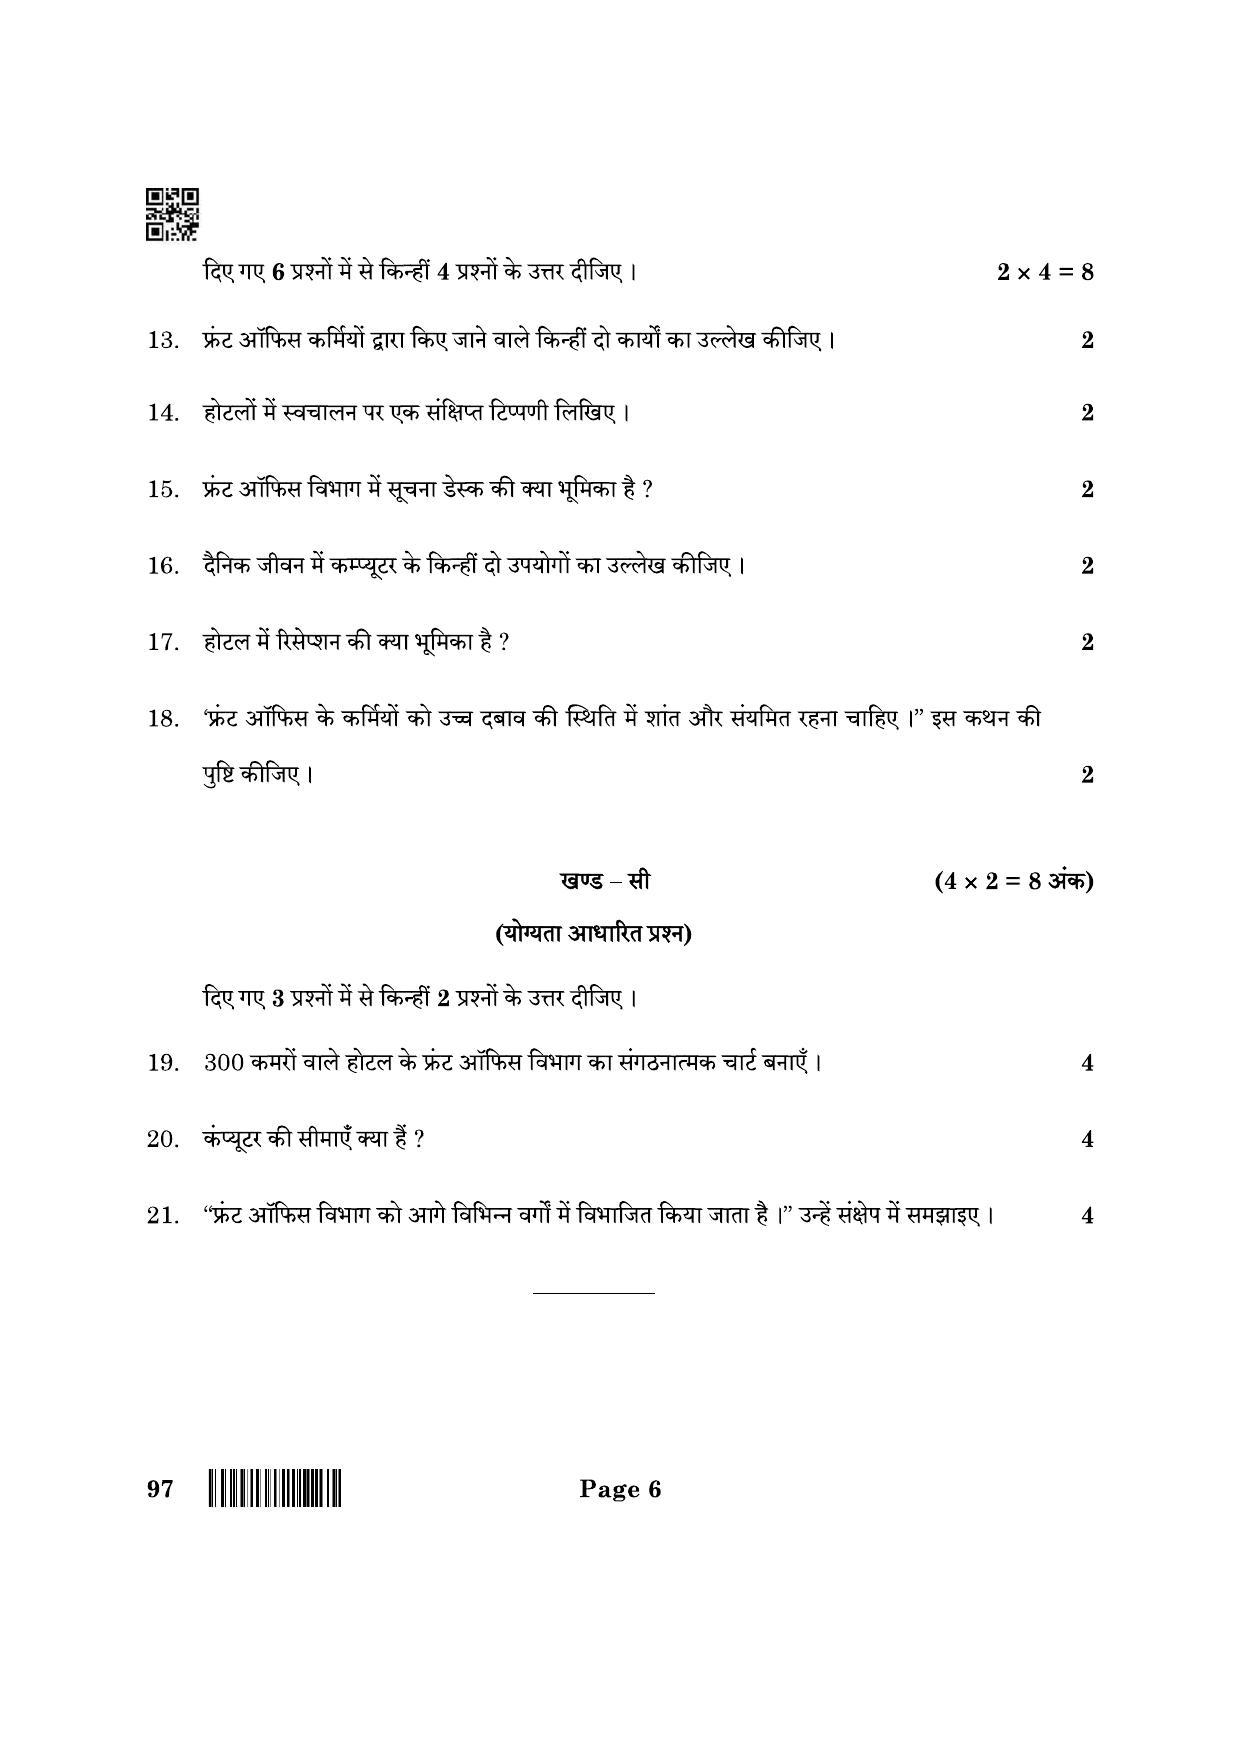 CBSE Class 10 97 Front Office Operations 2022 Question Paper - Page 6